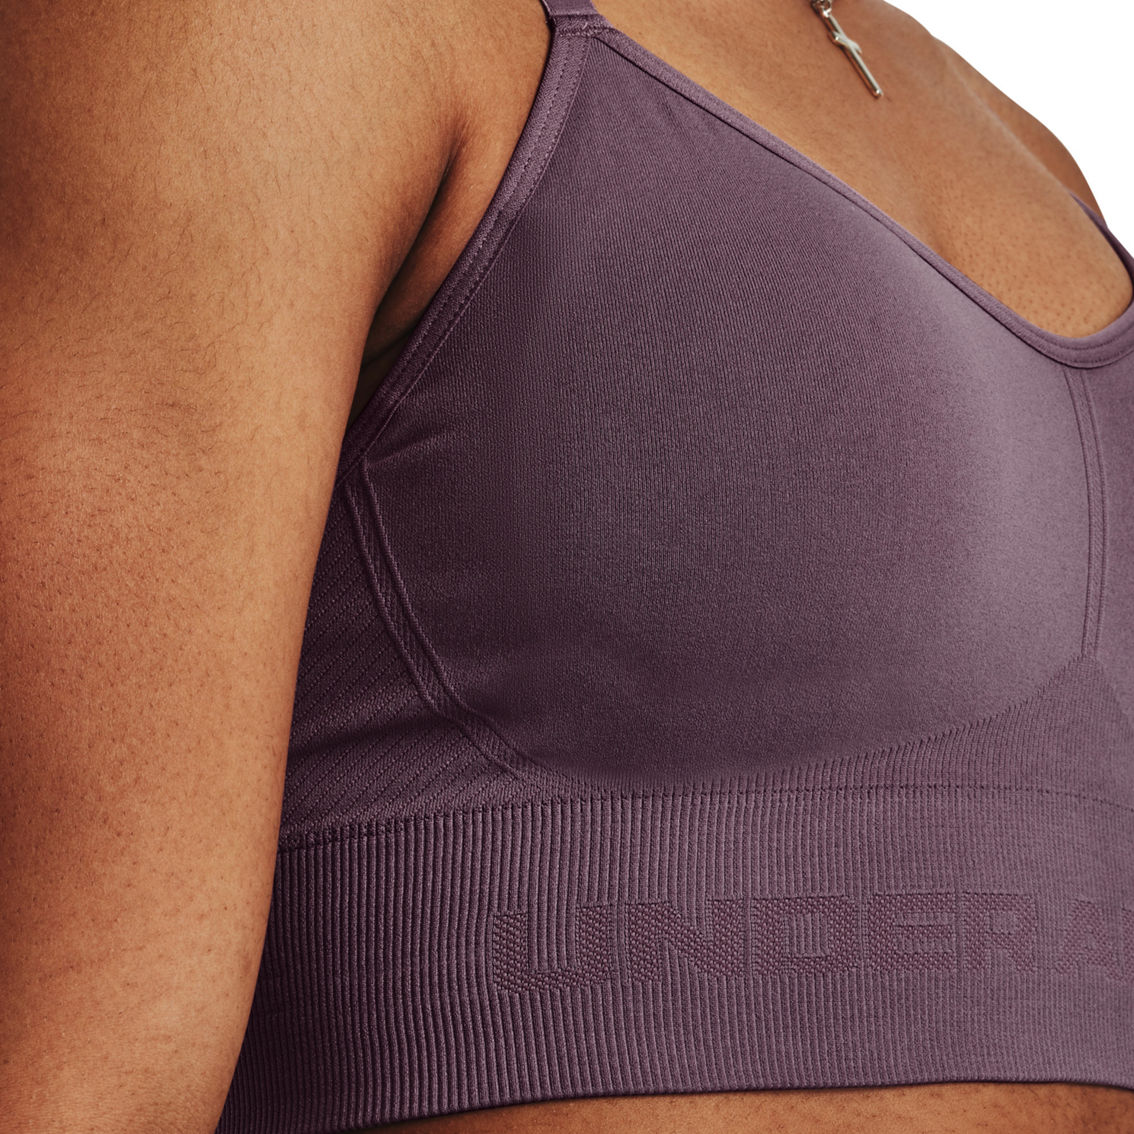 Under Armour Train Seamless Low Sports Bra - Image 3 of 6